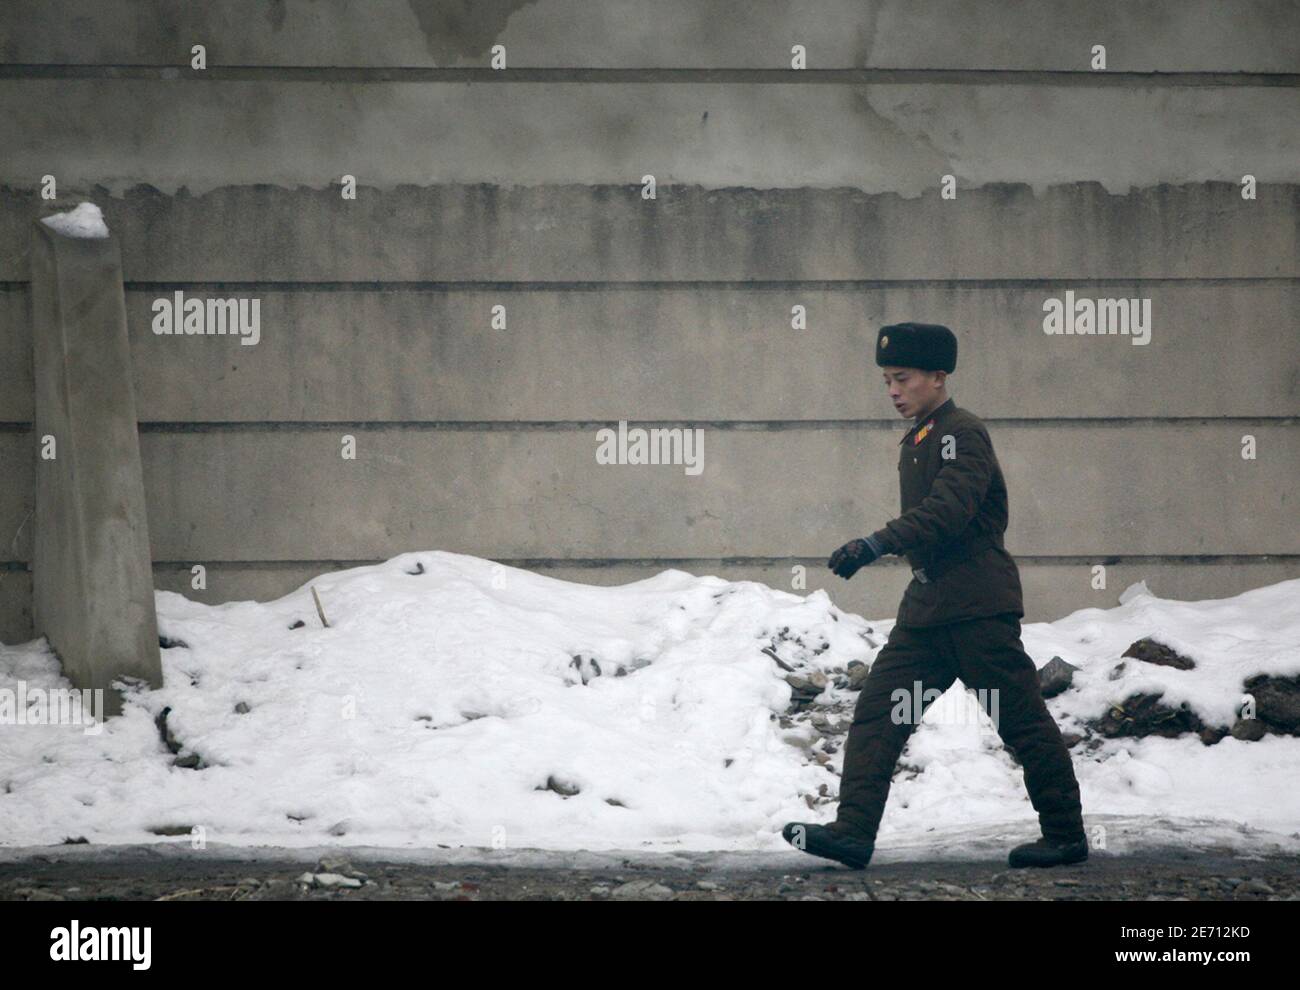 A North Korean soldier guards the bank of Yalu River near the North Korean town of Sinuiju, opposite the Chinese border city of Dandong, December 11, 2009. North Korea indicated on Friday it was ready to end its year-long boycott of nuclear negotiations, following talks in the reclusive state this week with a U.S. envoy to try to revive a disarmament-for-aid deal. REUTERS/Jacky Chen (NORTH KOREA POLITICS MILITARY) Stock Photo